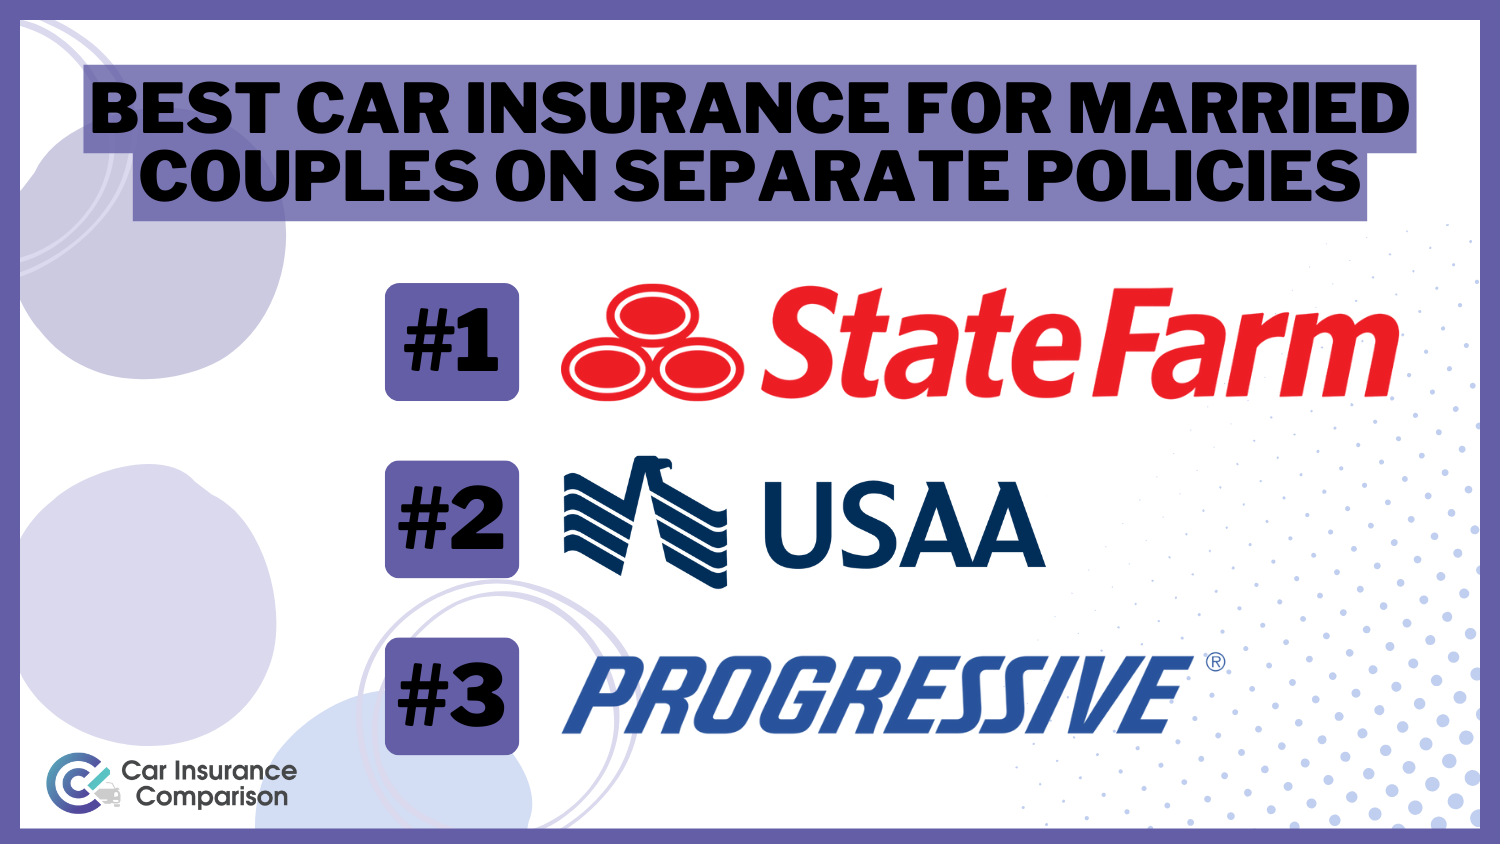 State Farm, USAA, and Progressive: Best Car Insurance for Married Couples on Separate Policies